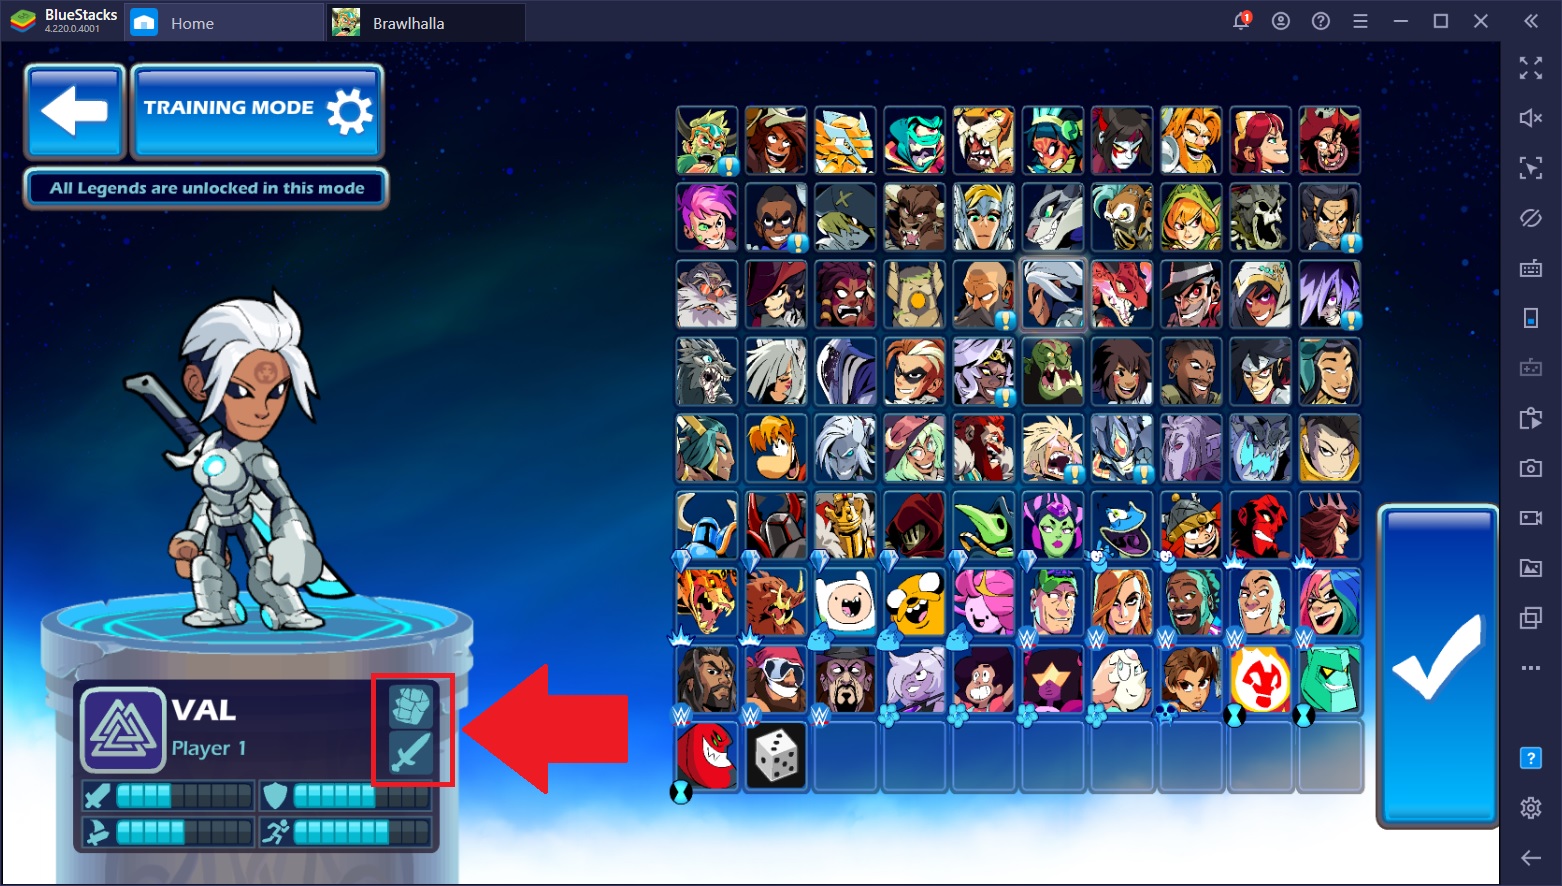 Beginner’s Guide for Brawlhalla - Introduction to the Basic Mechanics and Fundamentals